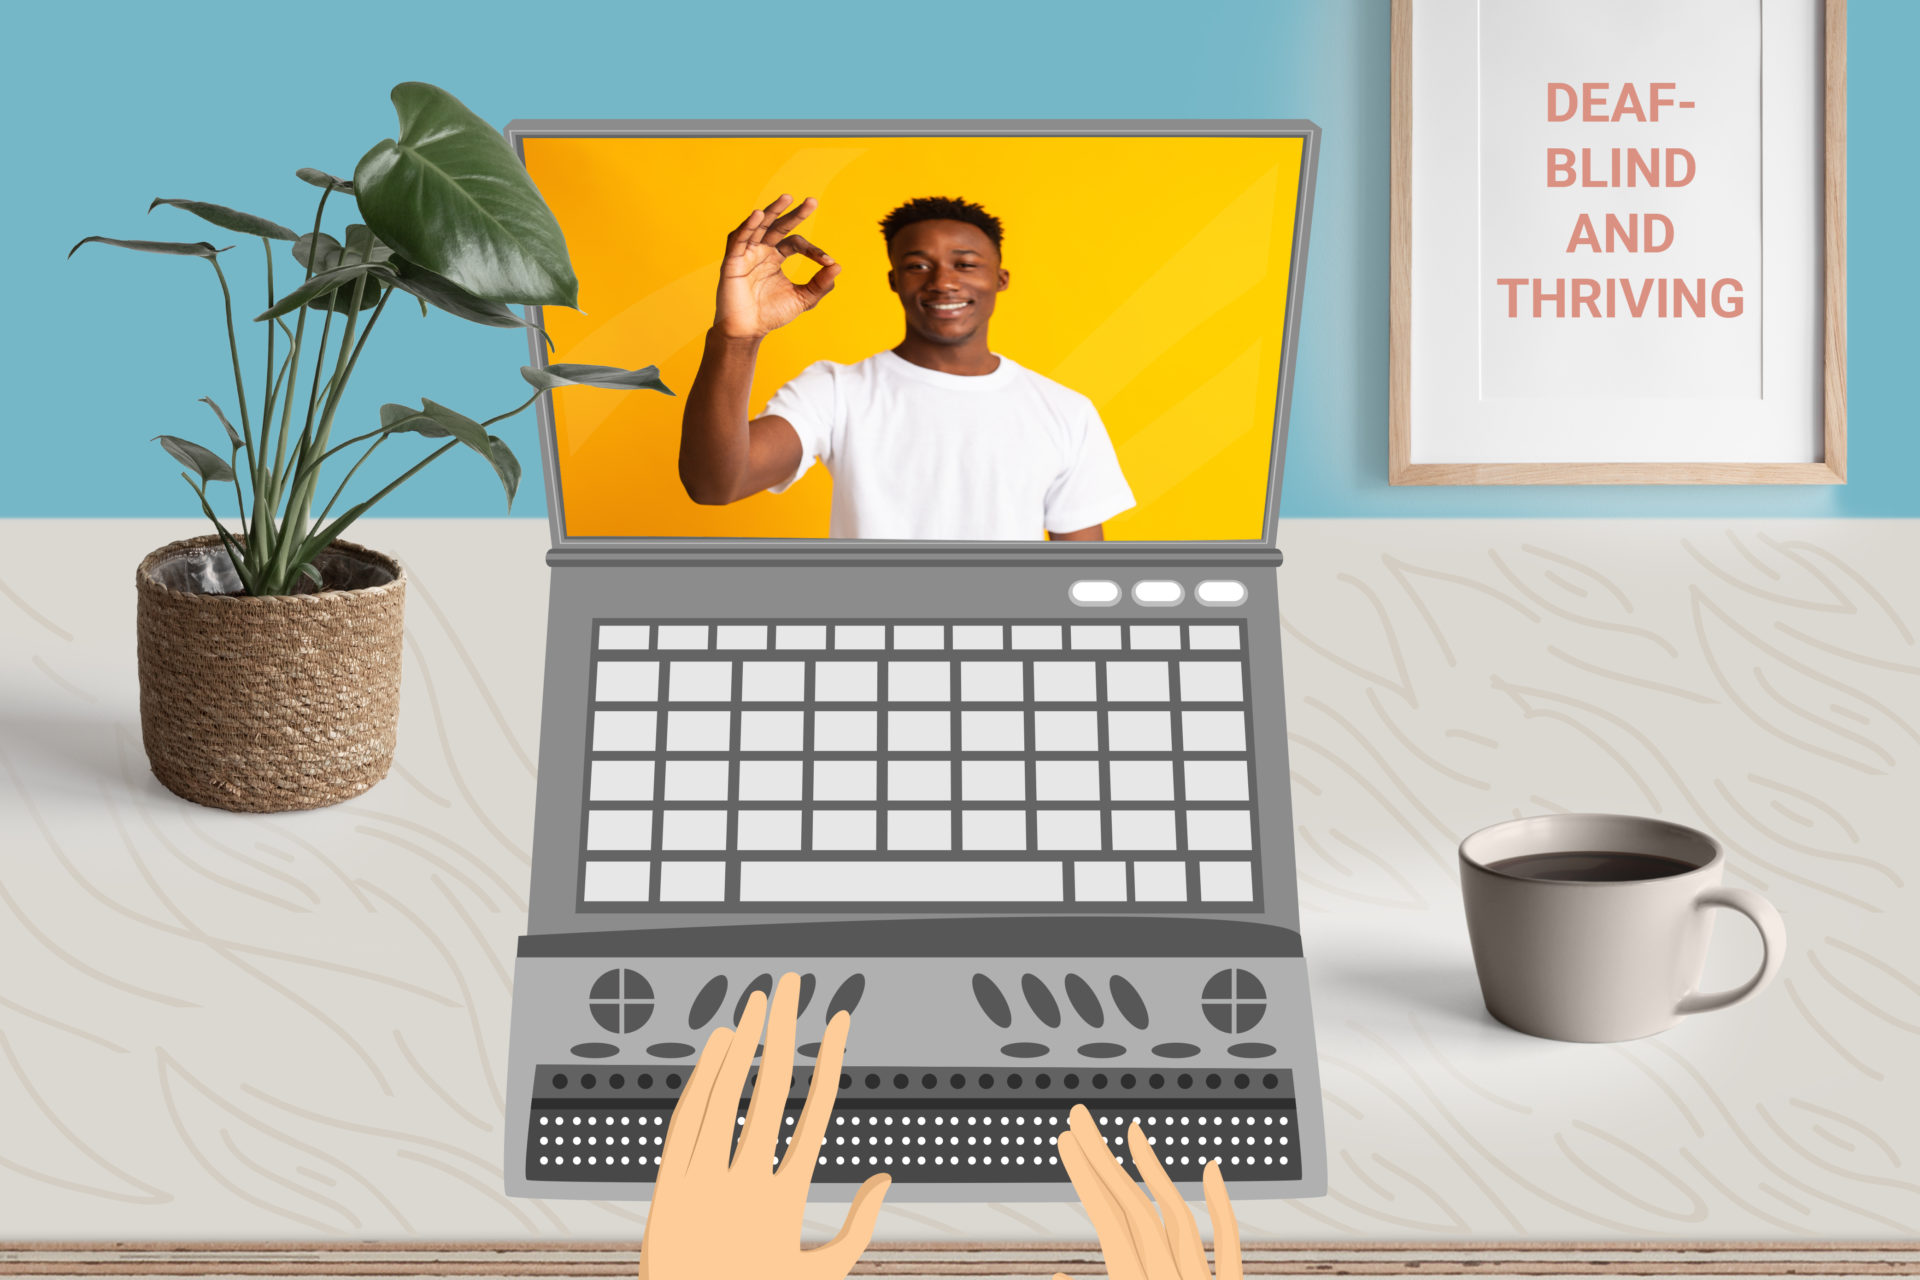 A person uses a Deafblind Communicator keyboard which sits in front of a laptop. The laptop pictures a person signing the 'OK' sign. There is a plant, a cup of coffee and a picture frame by the desk which reads 'Deafblind and Thriving'.